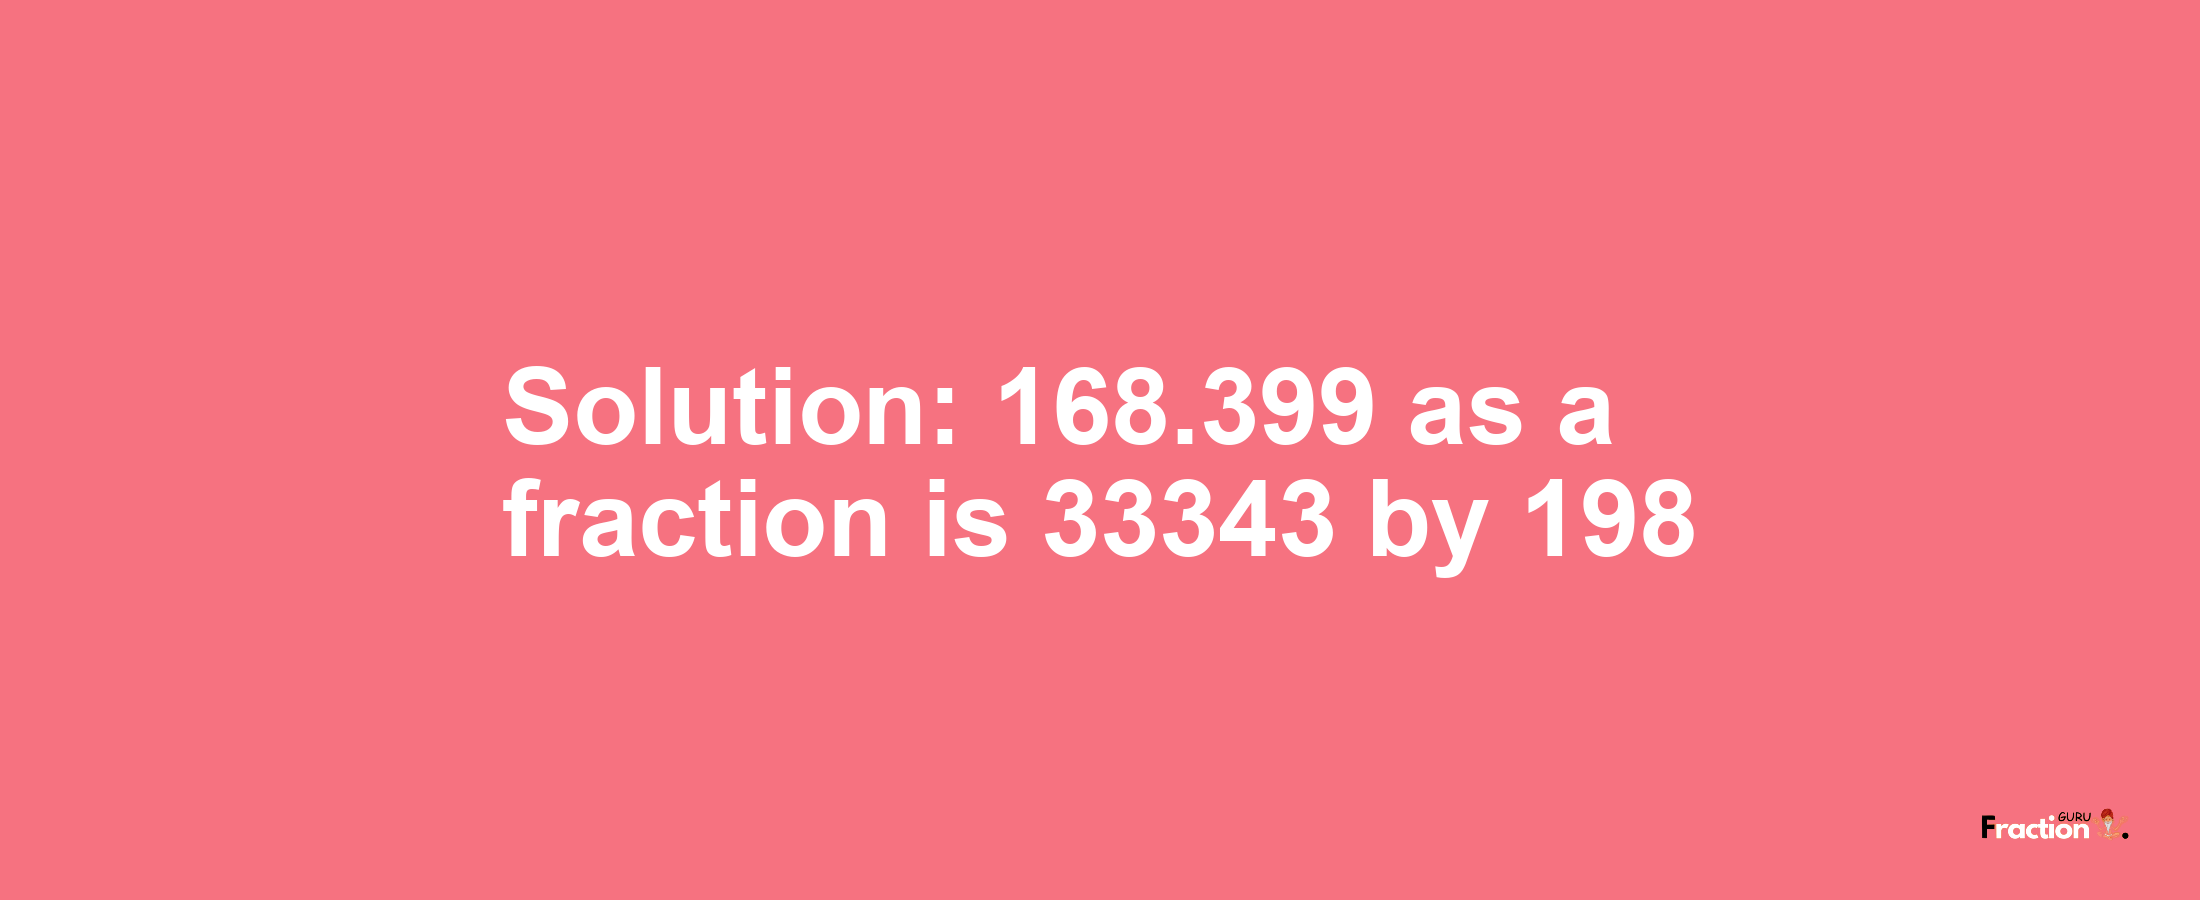 Solution:168.399 as a fraction is 33343/198